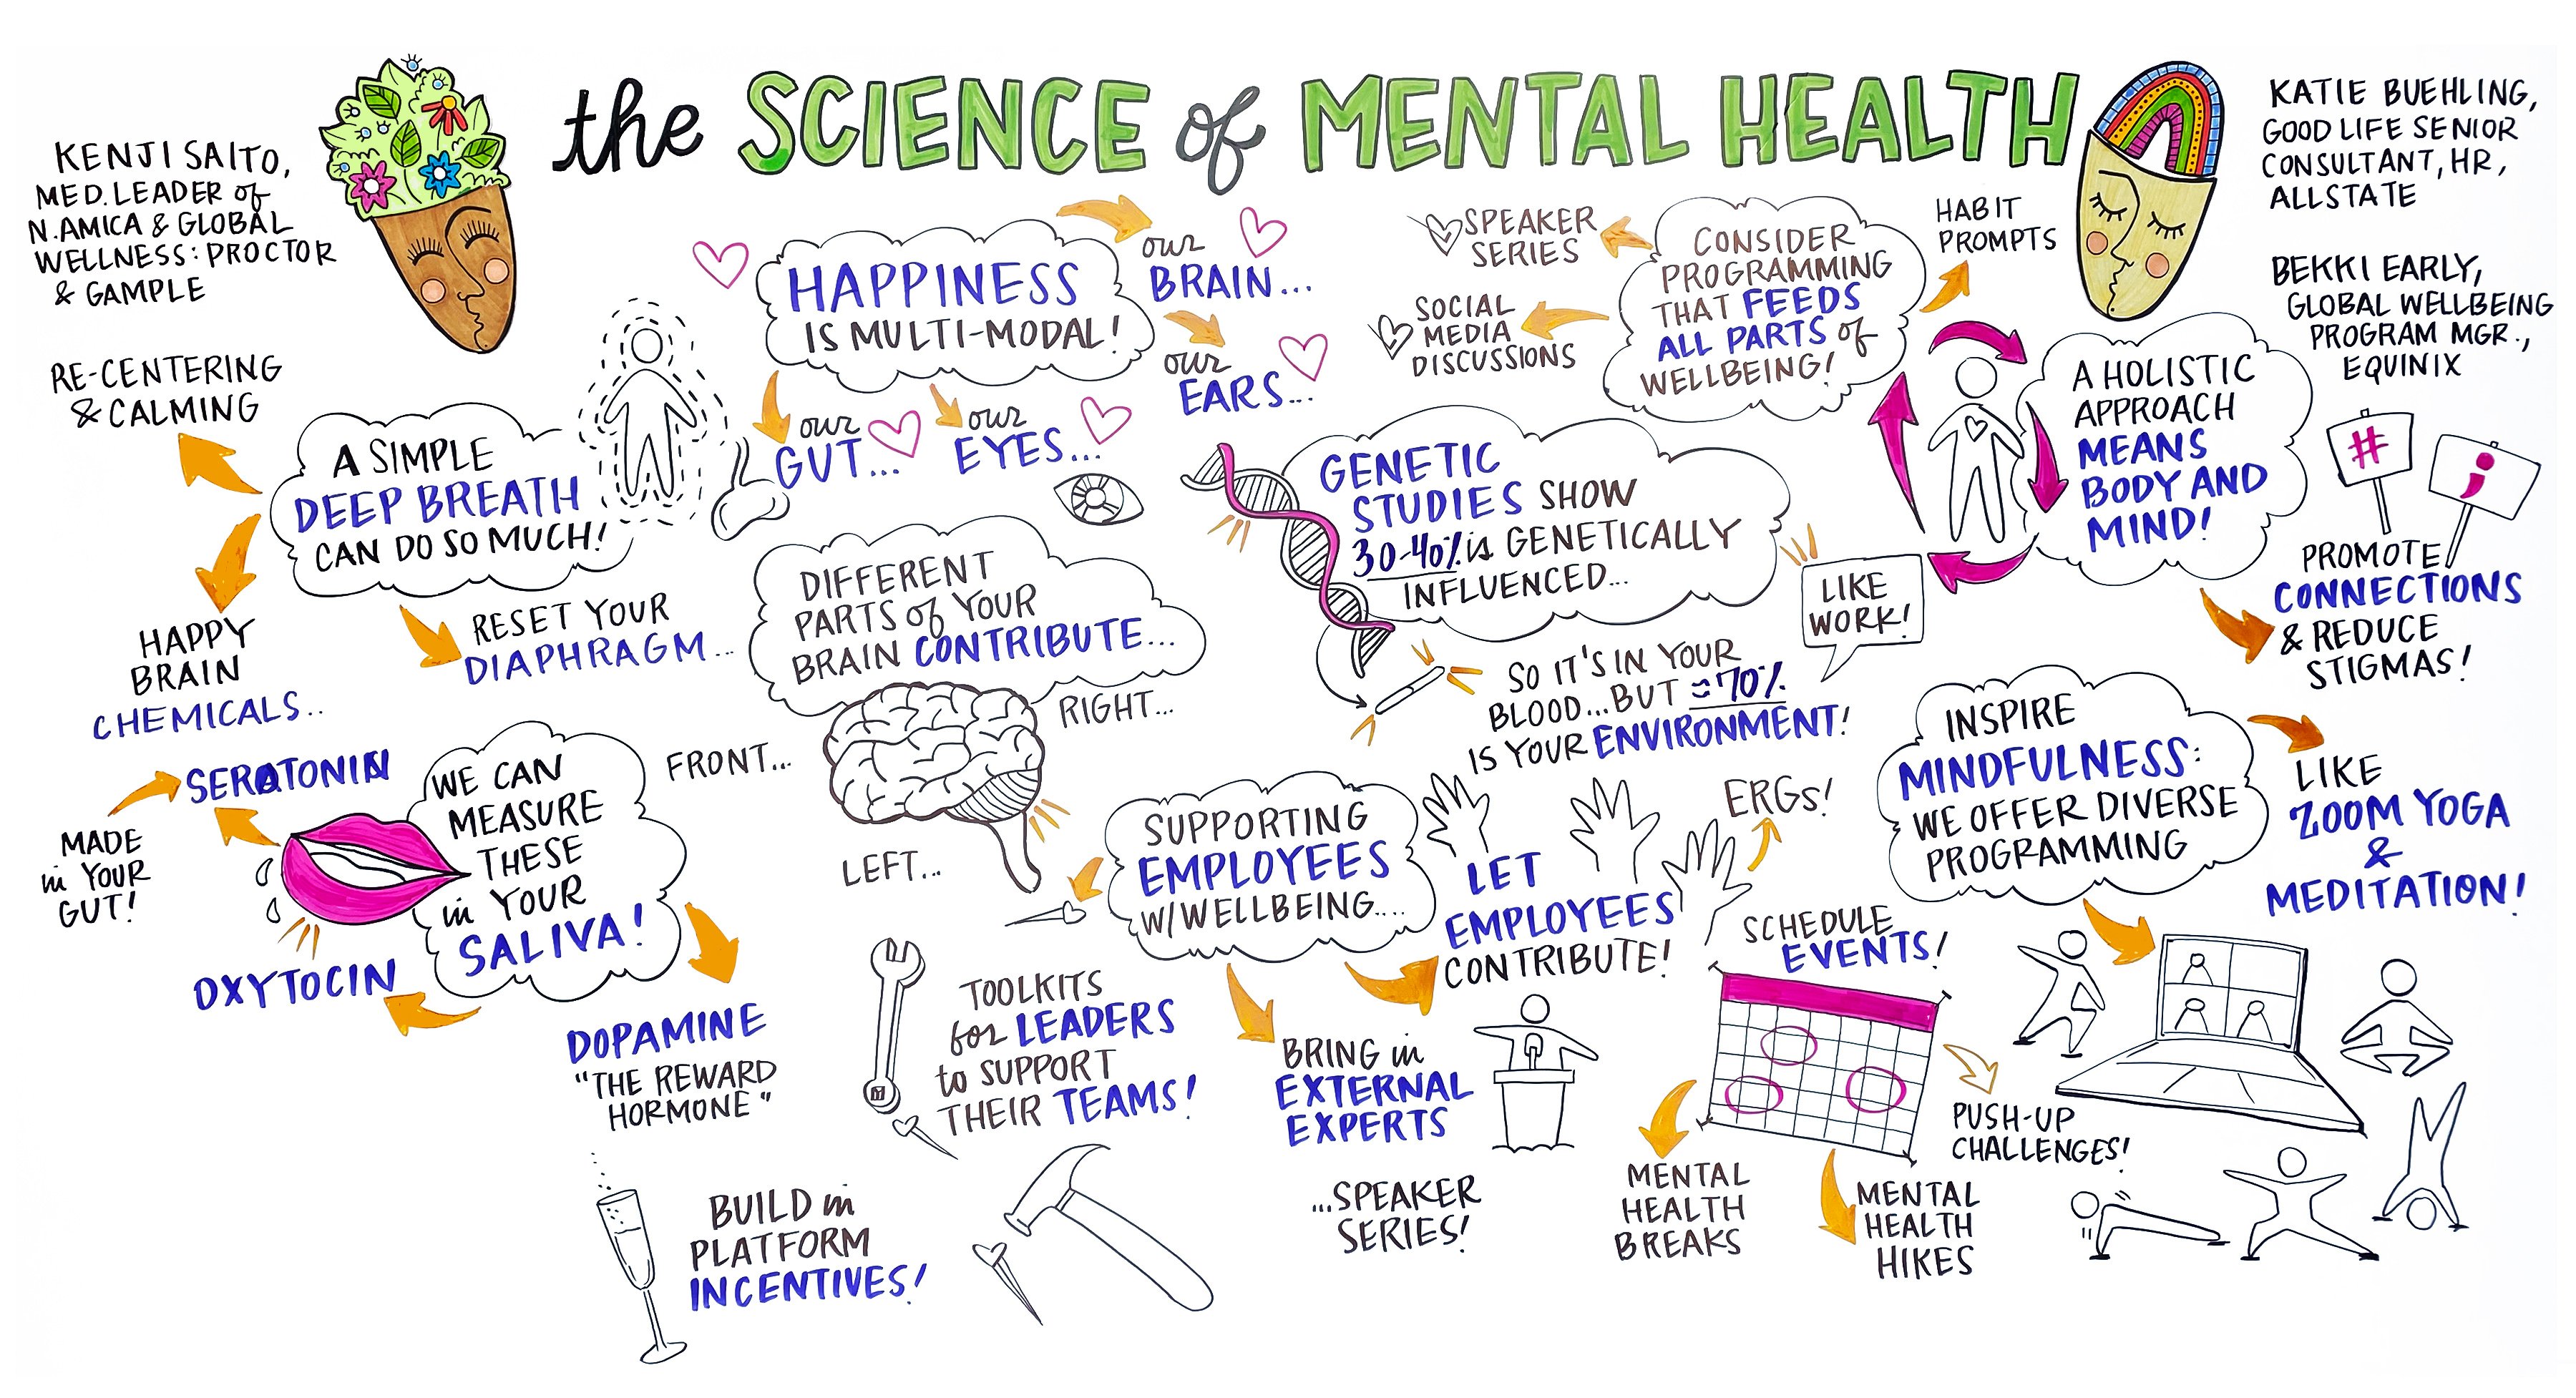 06_The Science of Mental Health